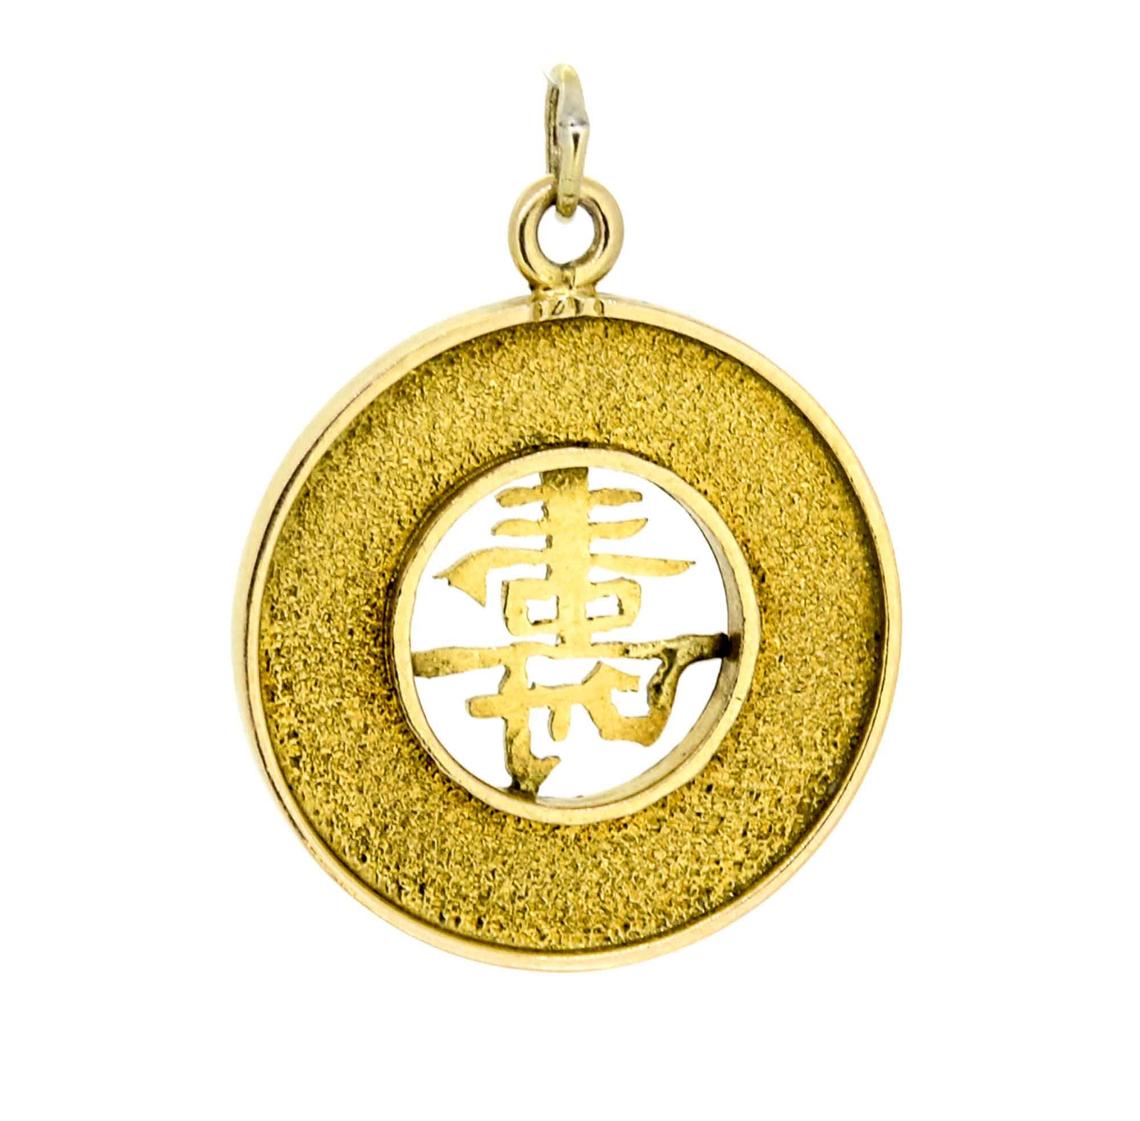 1960s 14ct Gold "Long Life" Chinese Medallion